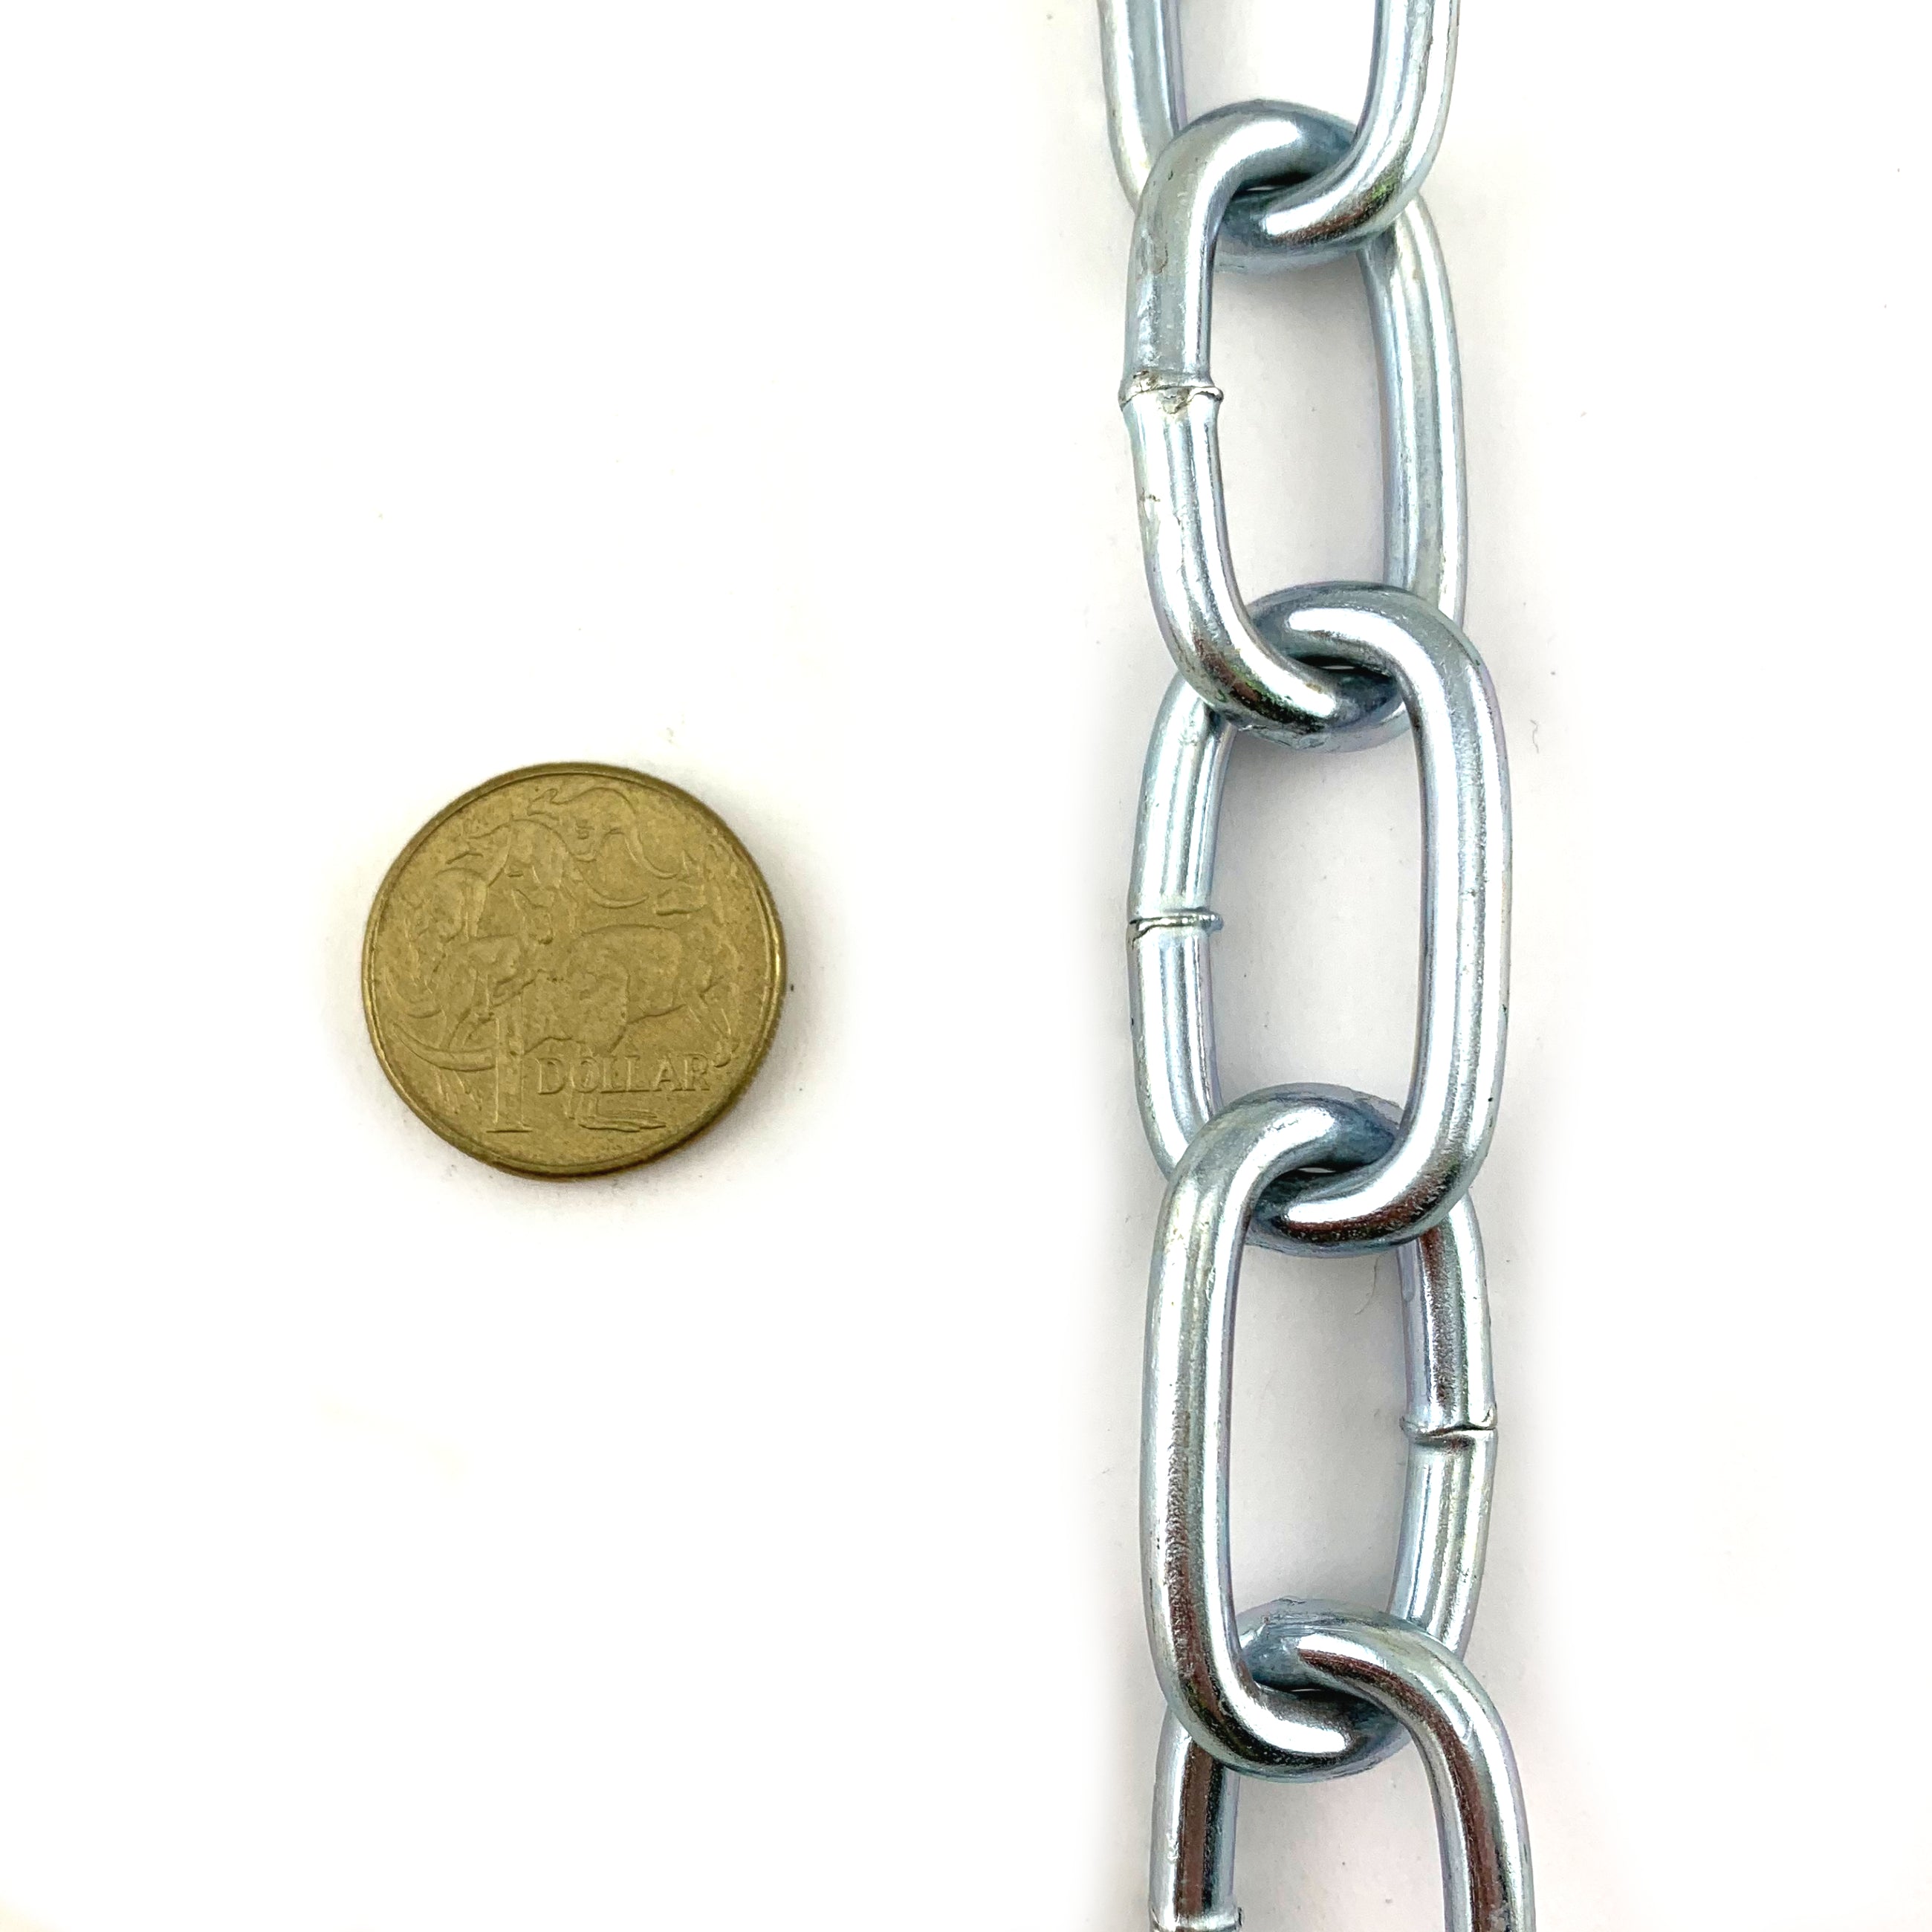 5mm long link zinc plated roller door chain, qty 25kg, approx 56.5m in a bucket. Melbourne, Australia.